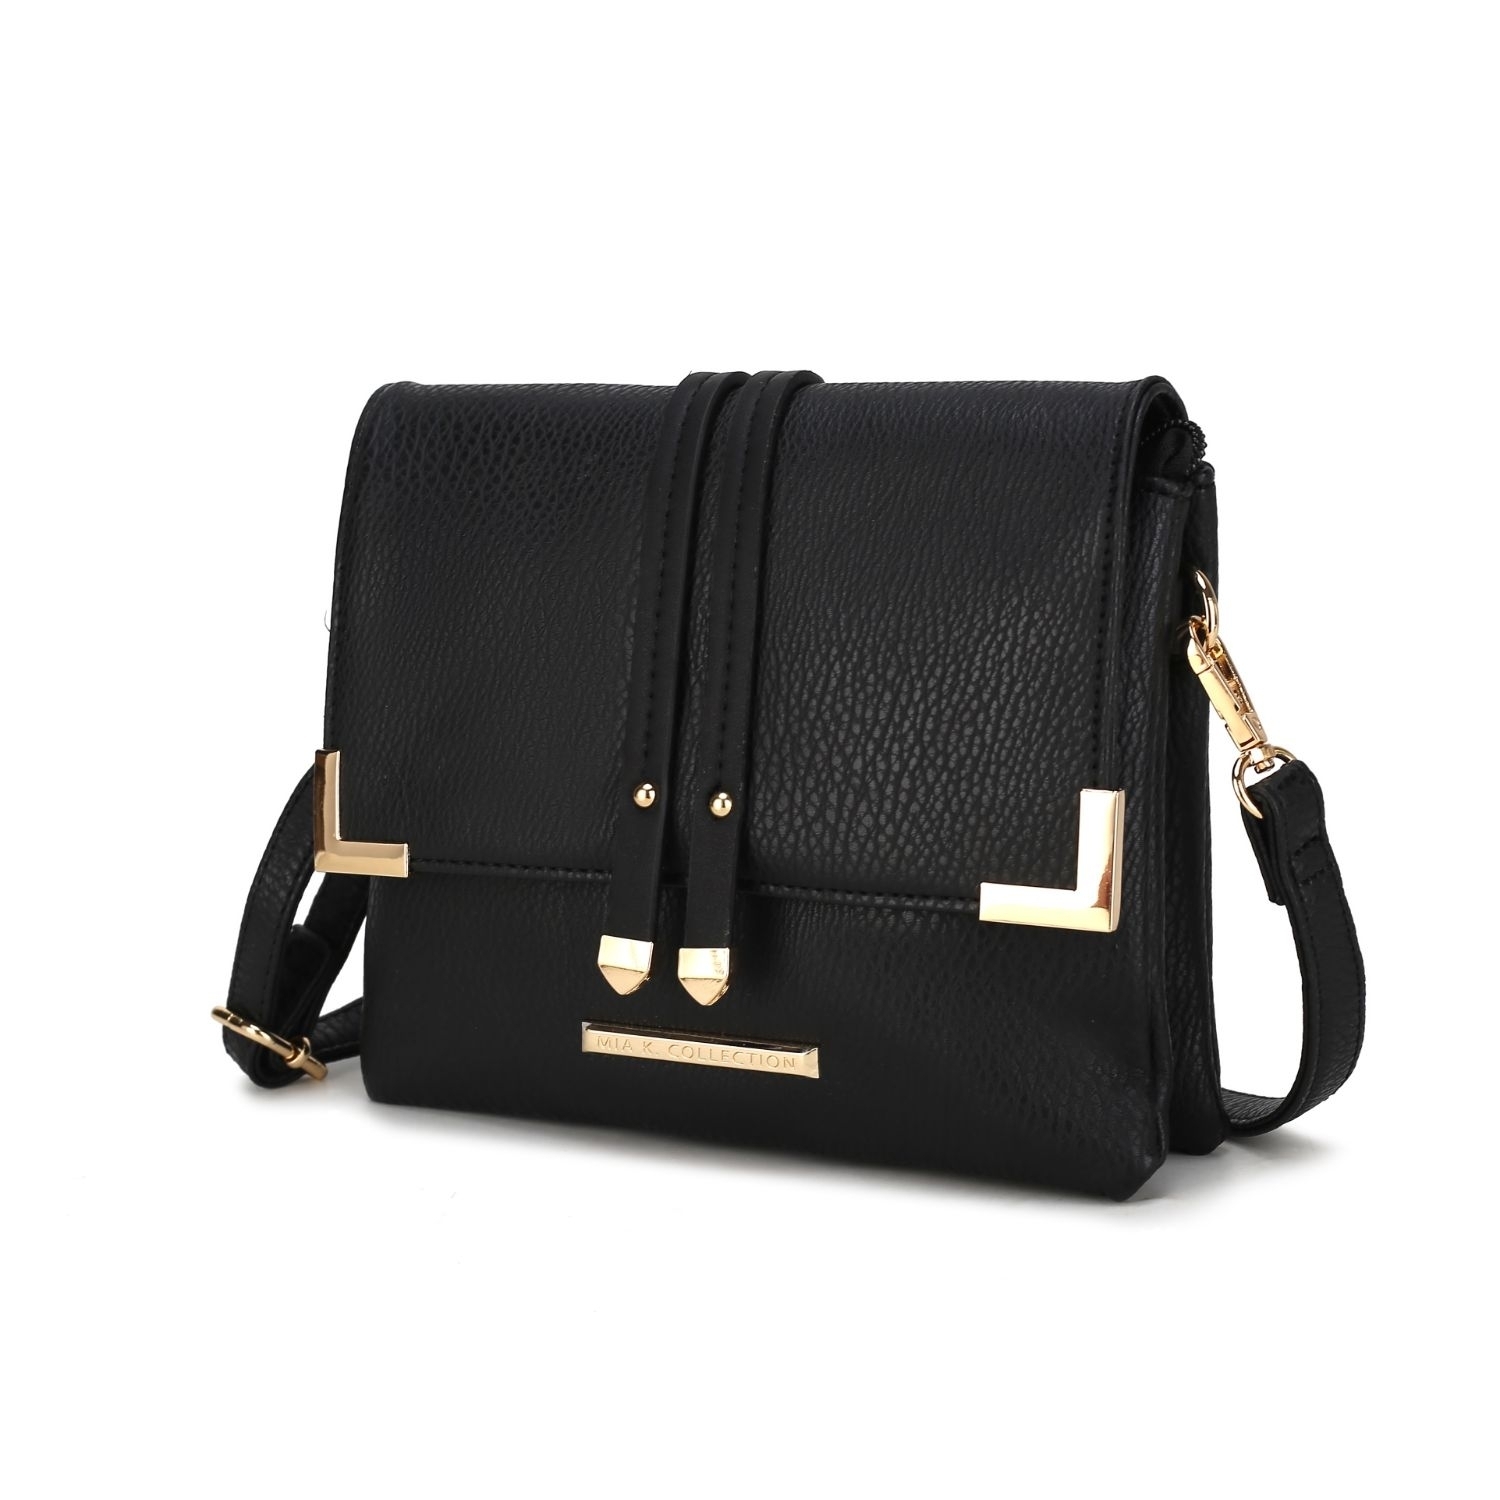 MKF Collection Valeska Multi Compartment Crossbody By Mia K. - Charcoal